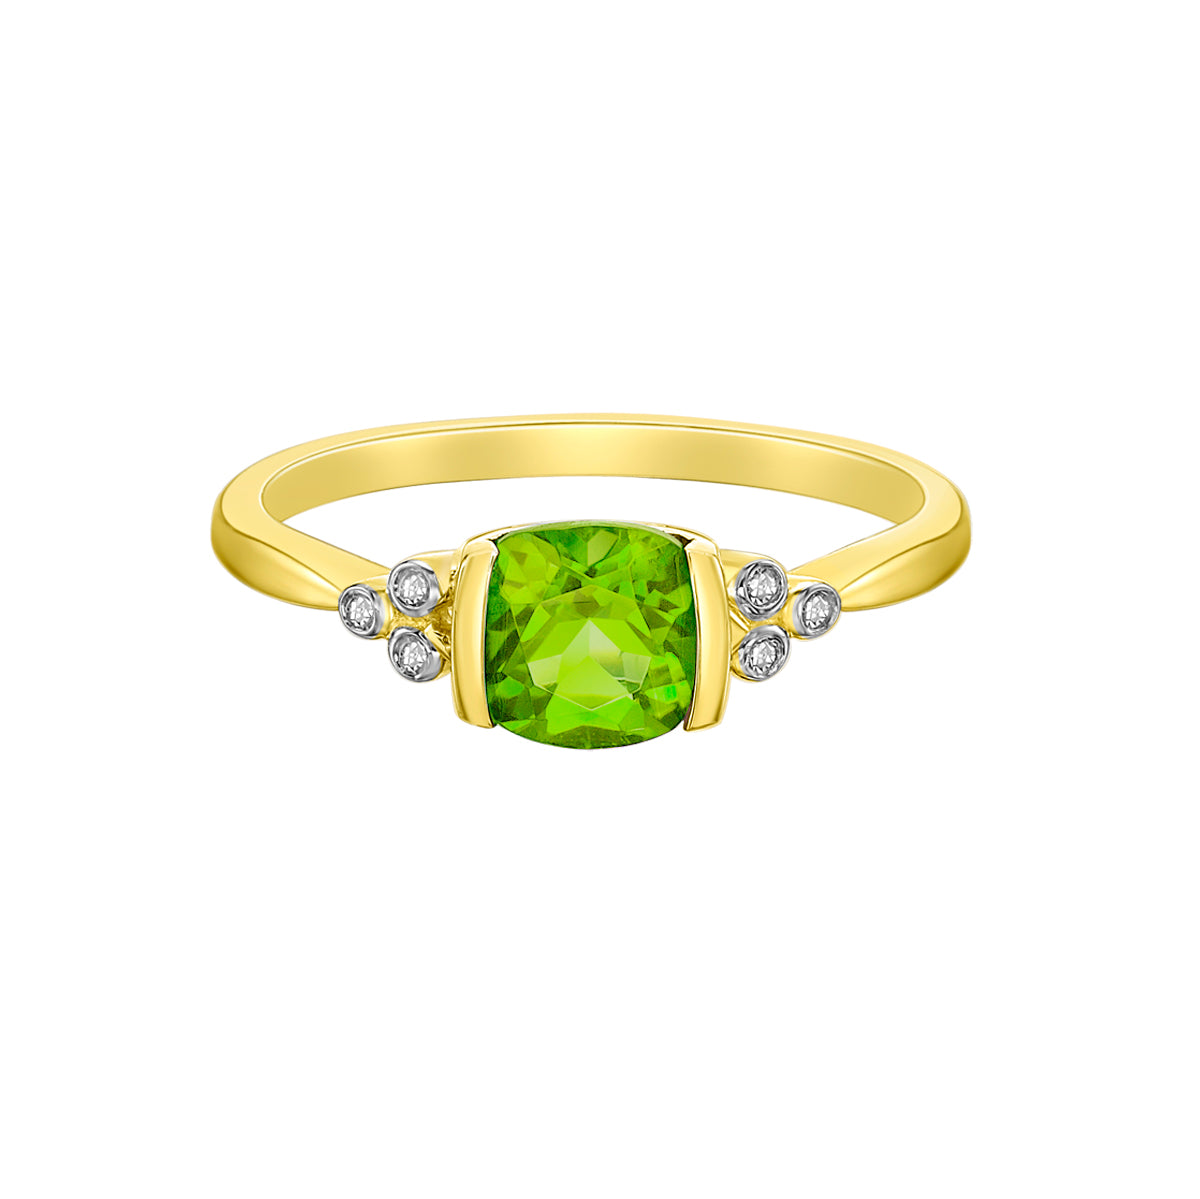 10K Yellow Gold Channel-set Peridot Ring with Diamond Accent